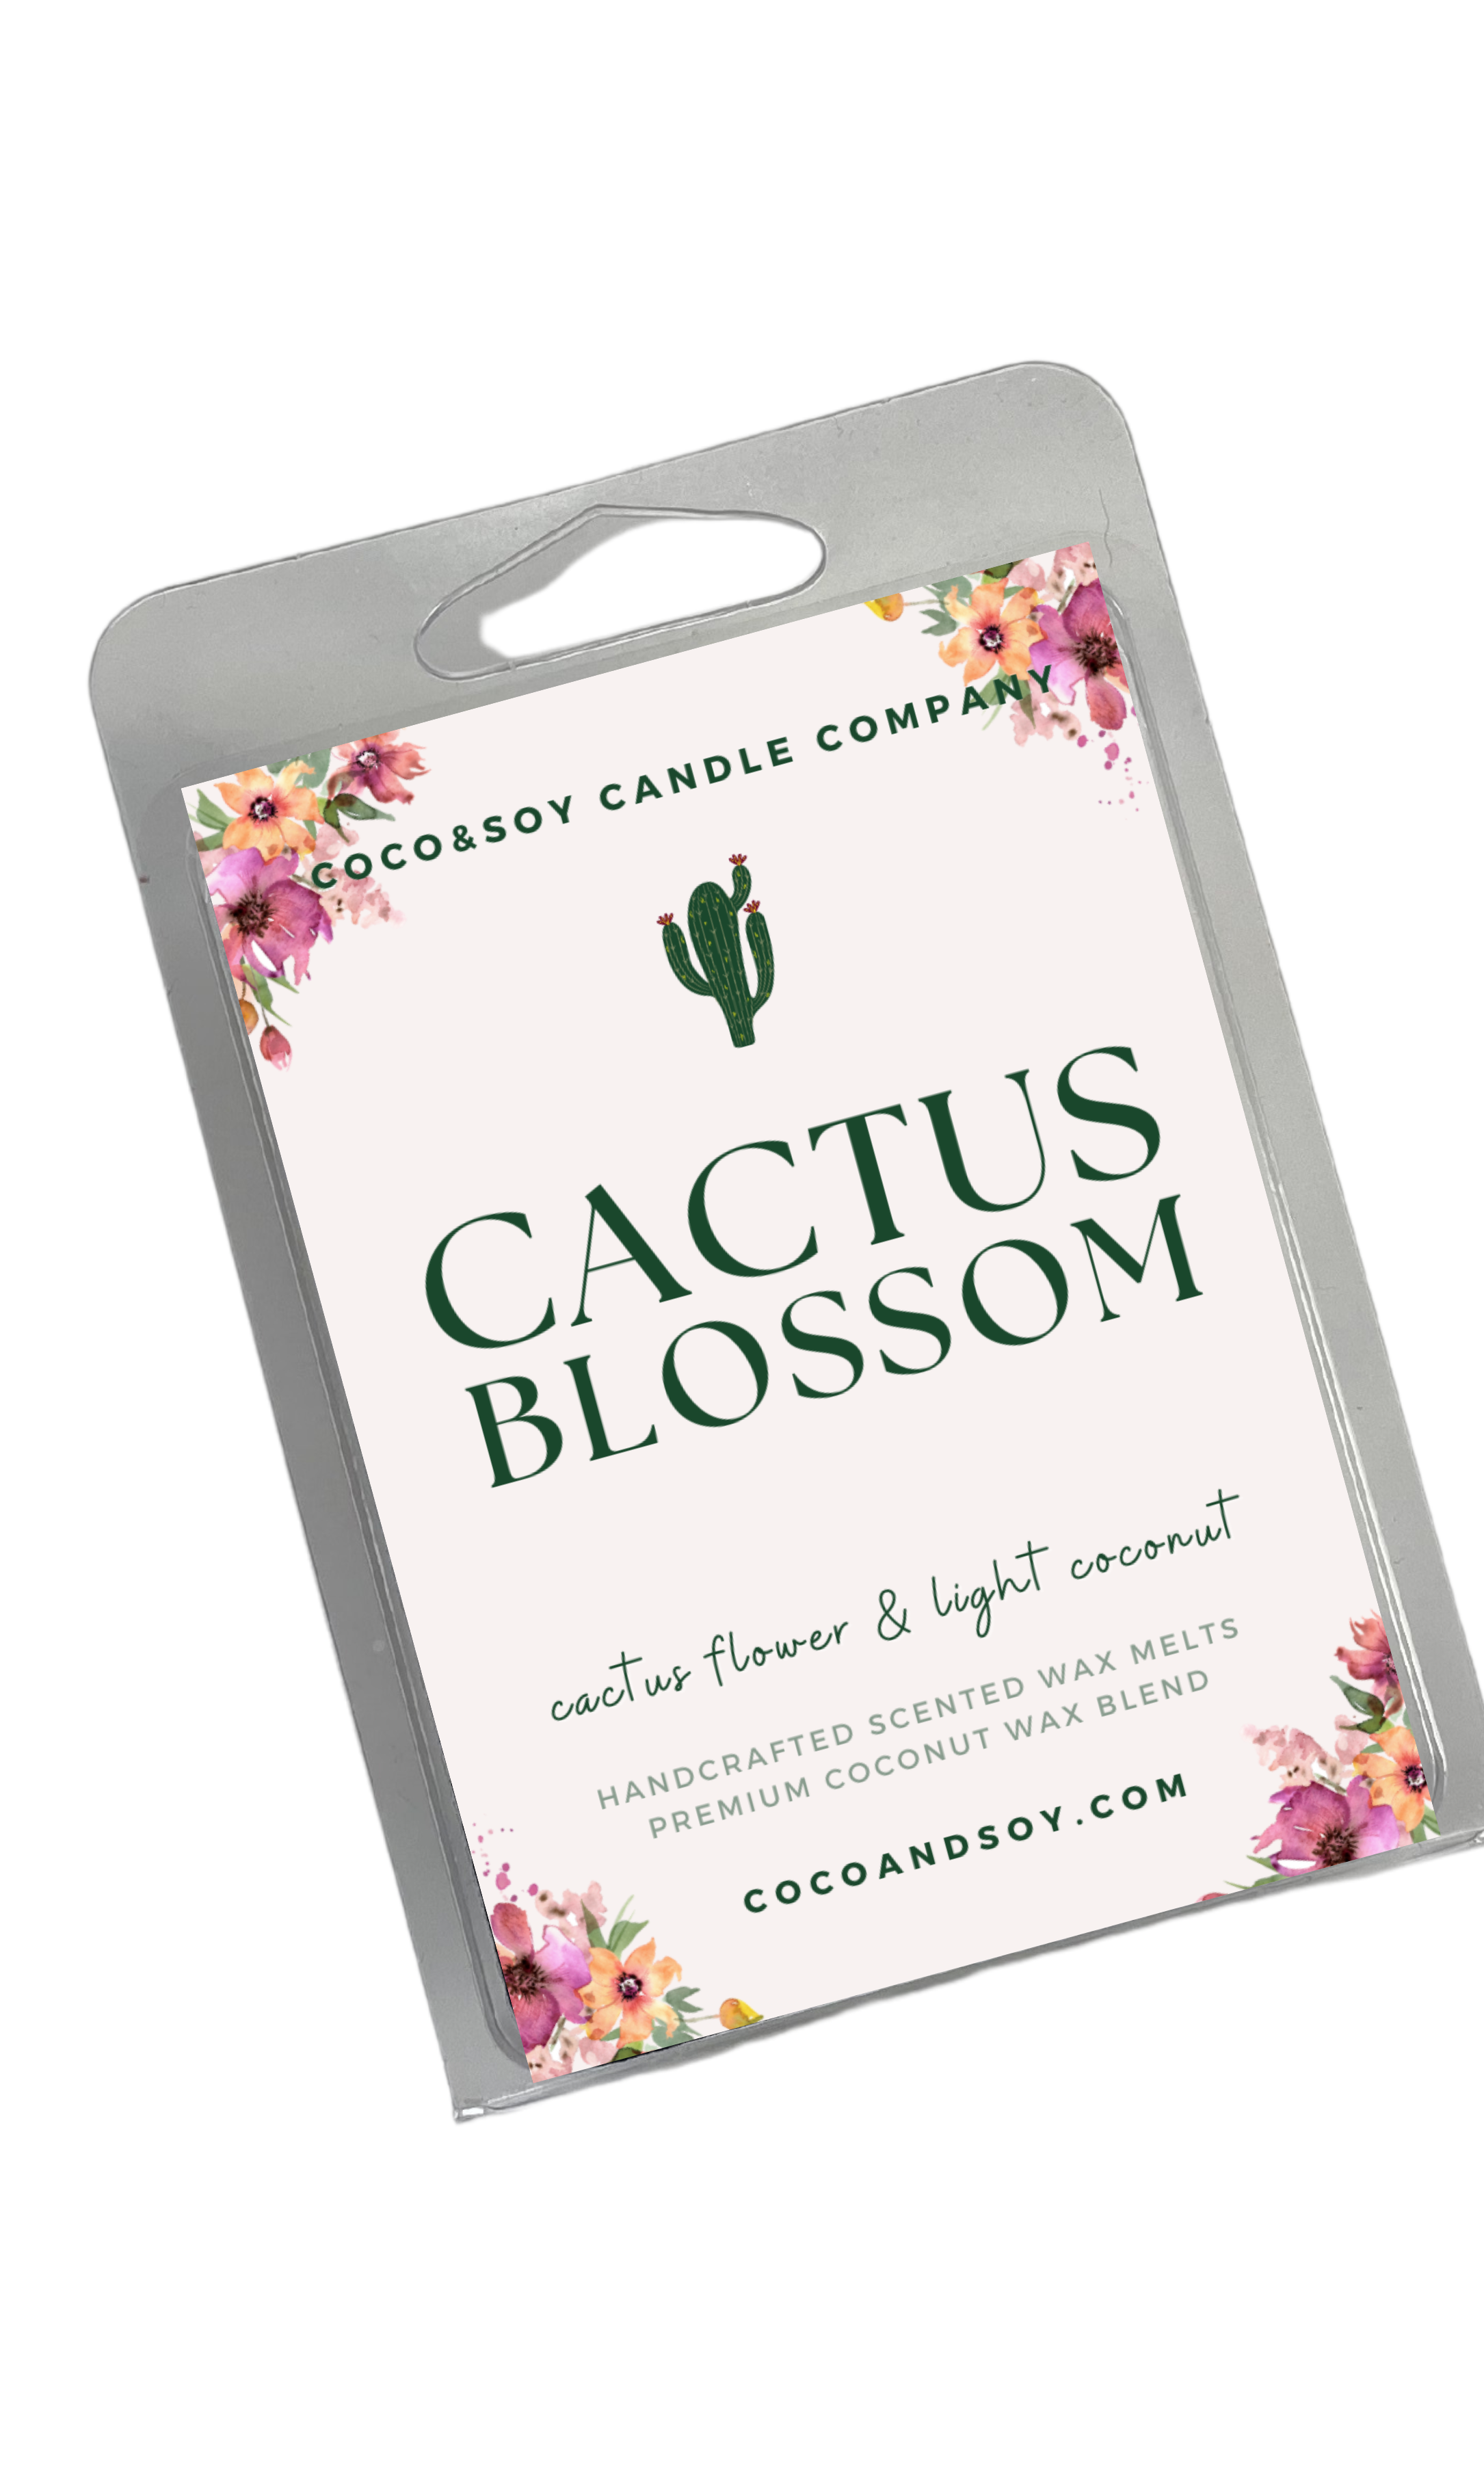 Cactus Blossom Wax Melts & Candles CocoandSoy Candle Company